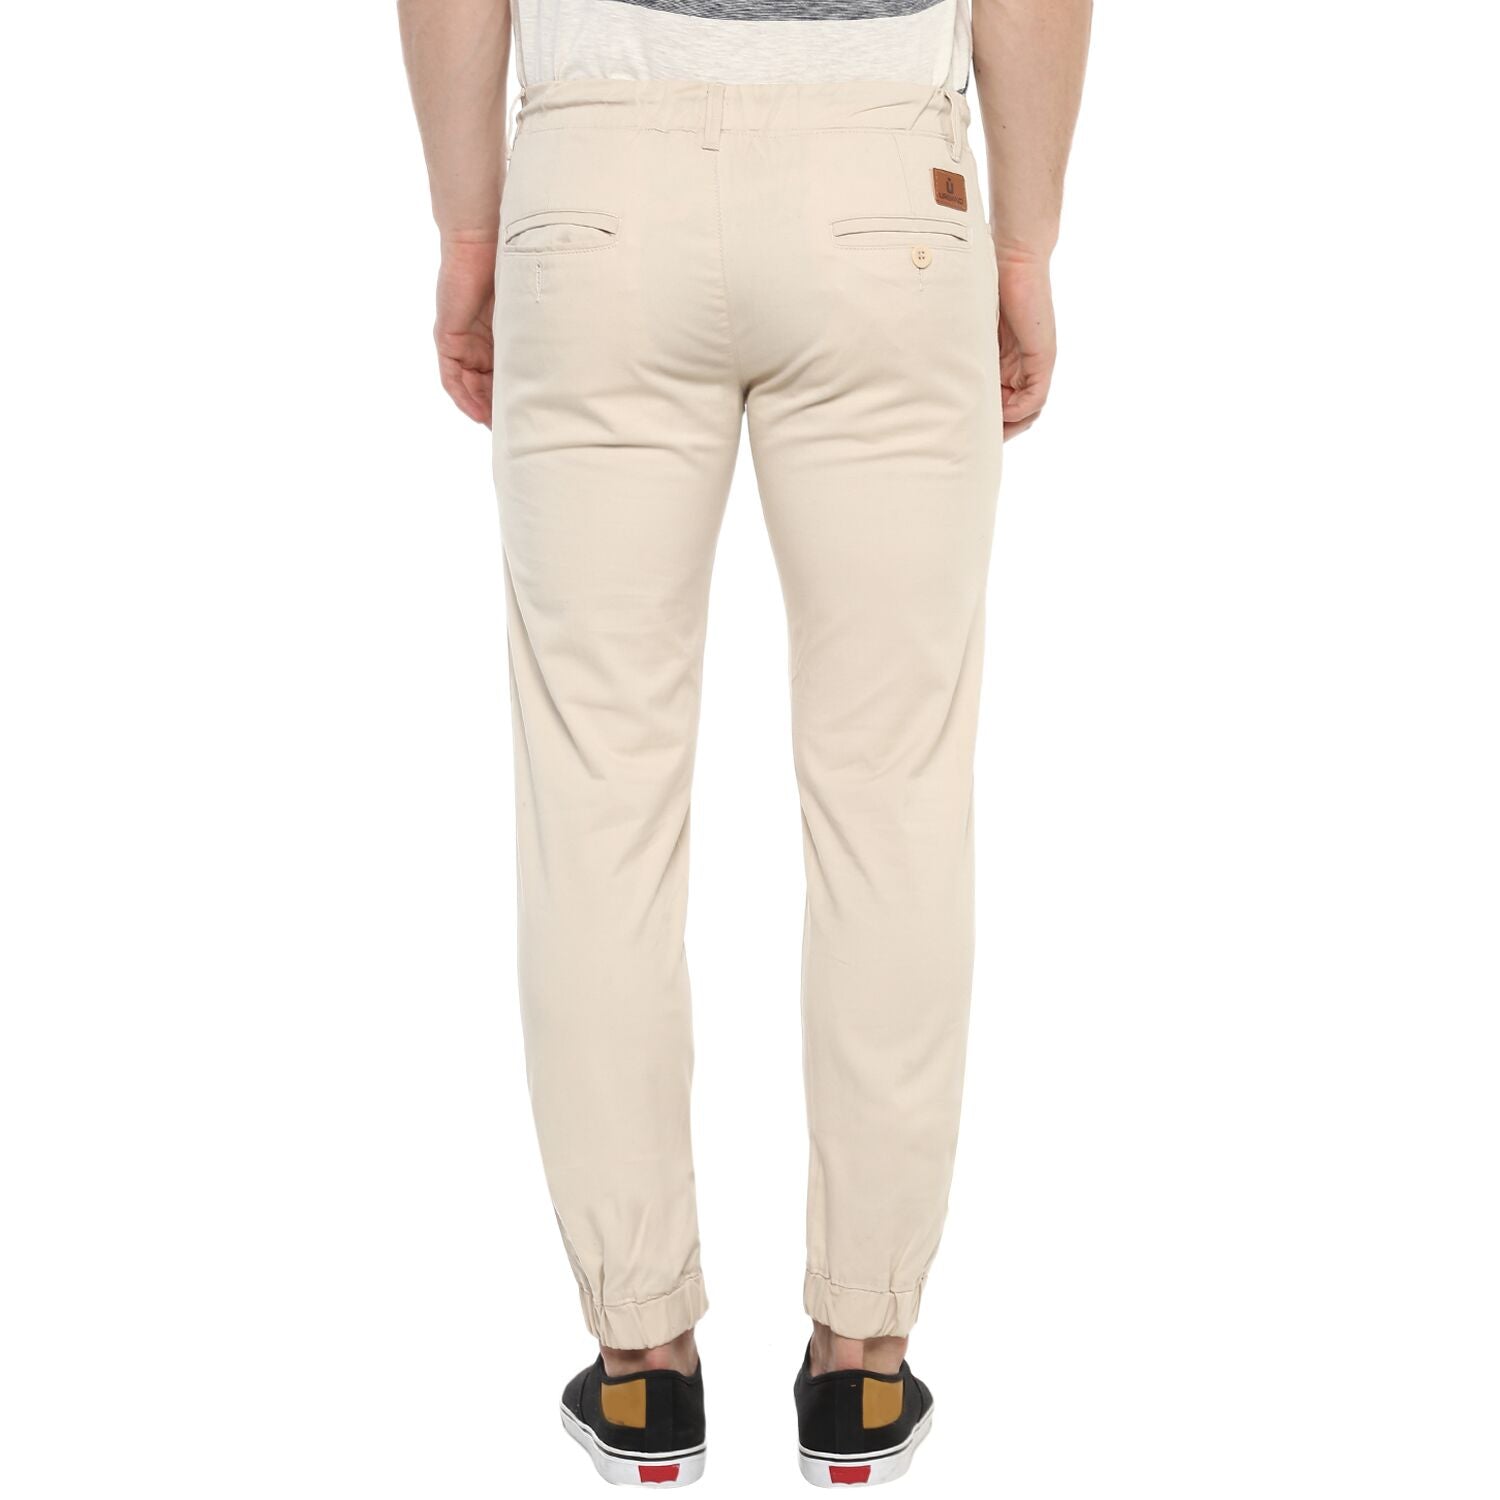 Men's Cream Casual Chino Jogger Pants Slim Fit Stretch